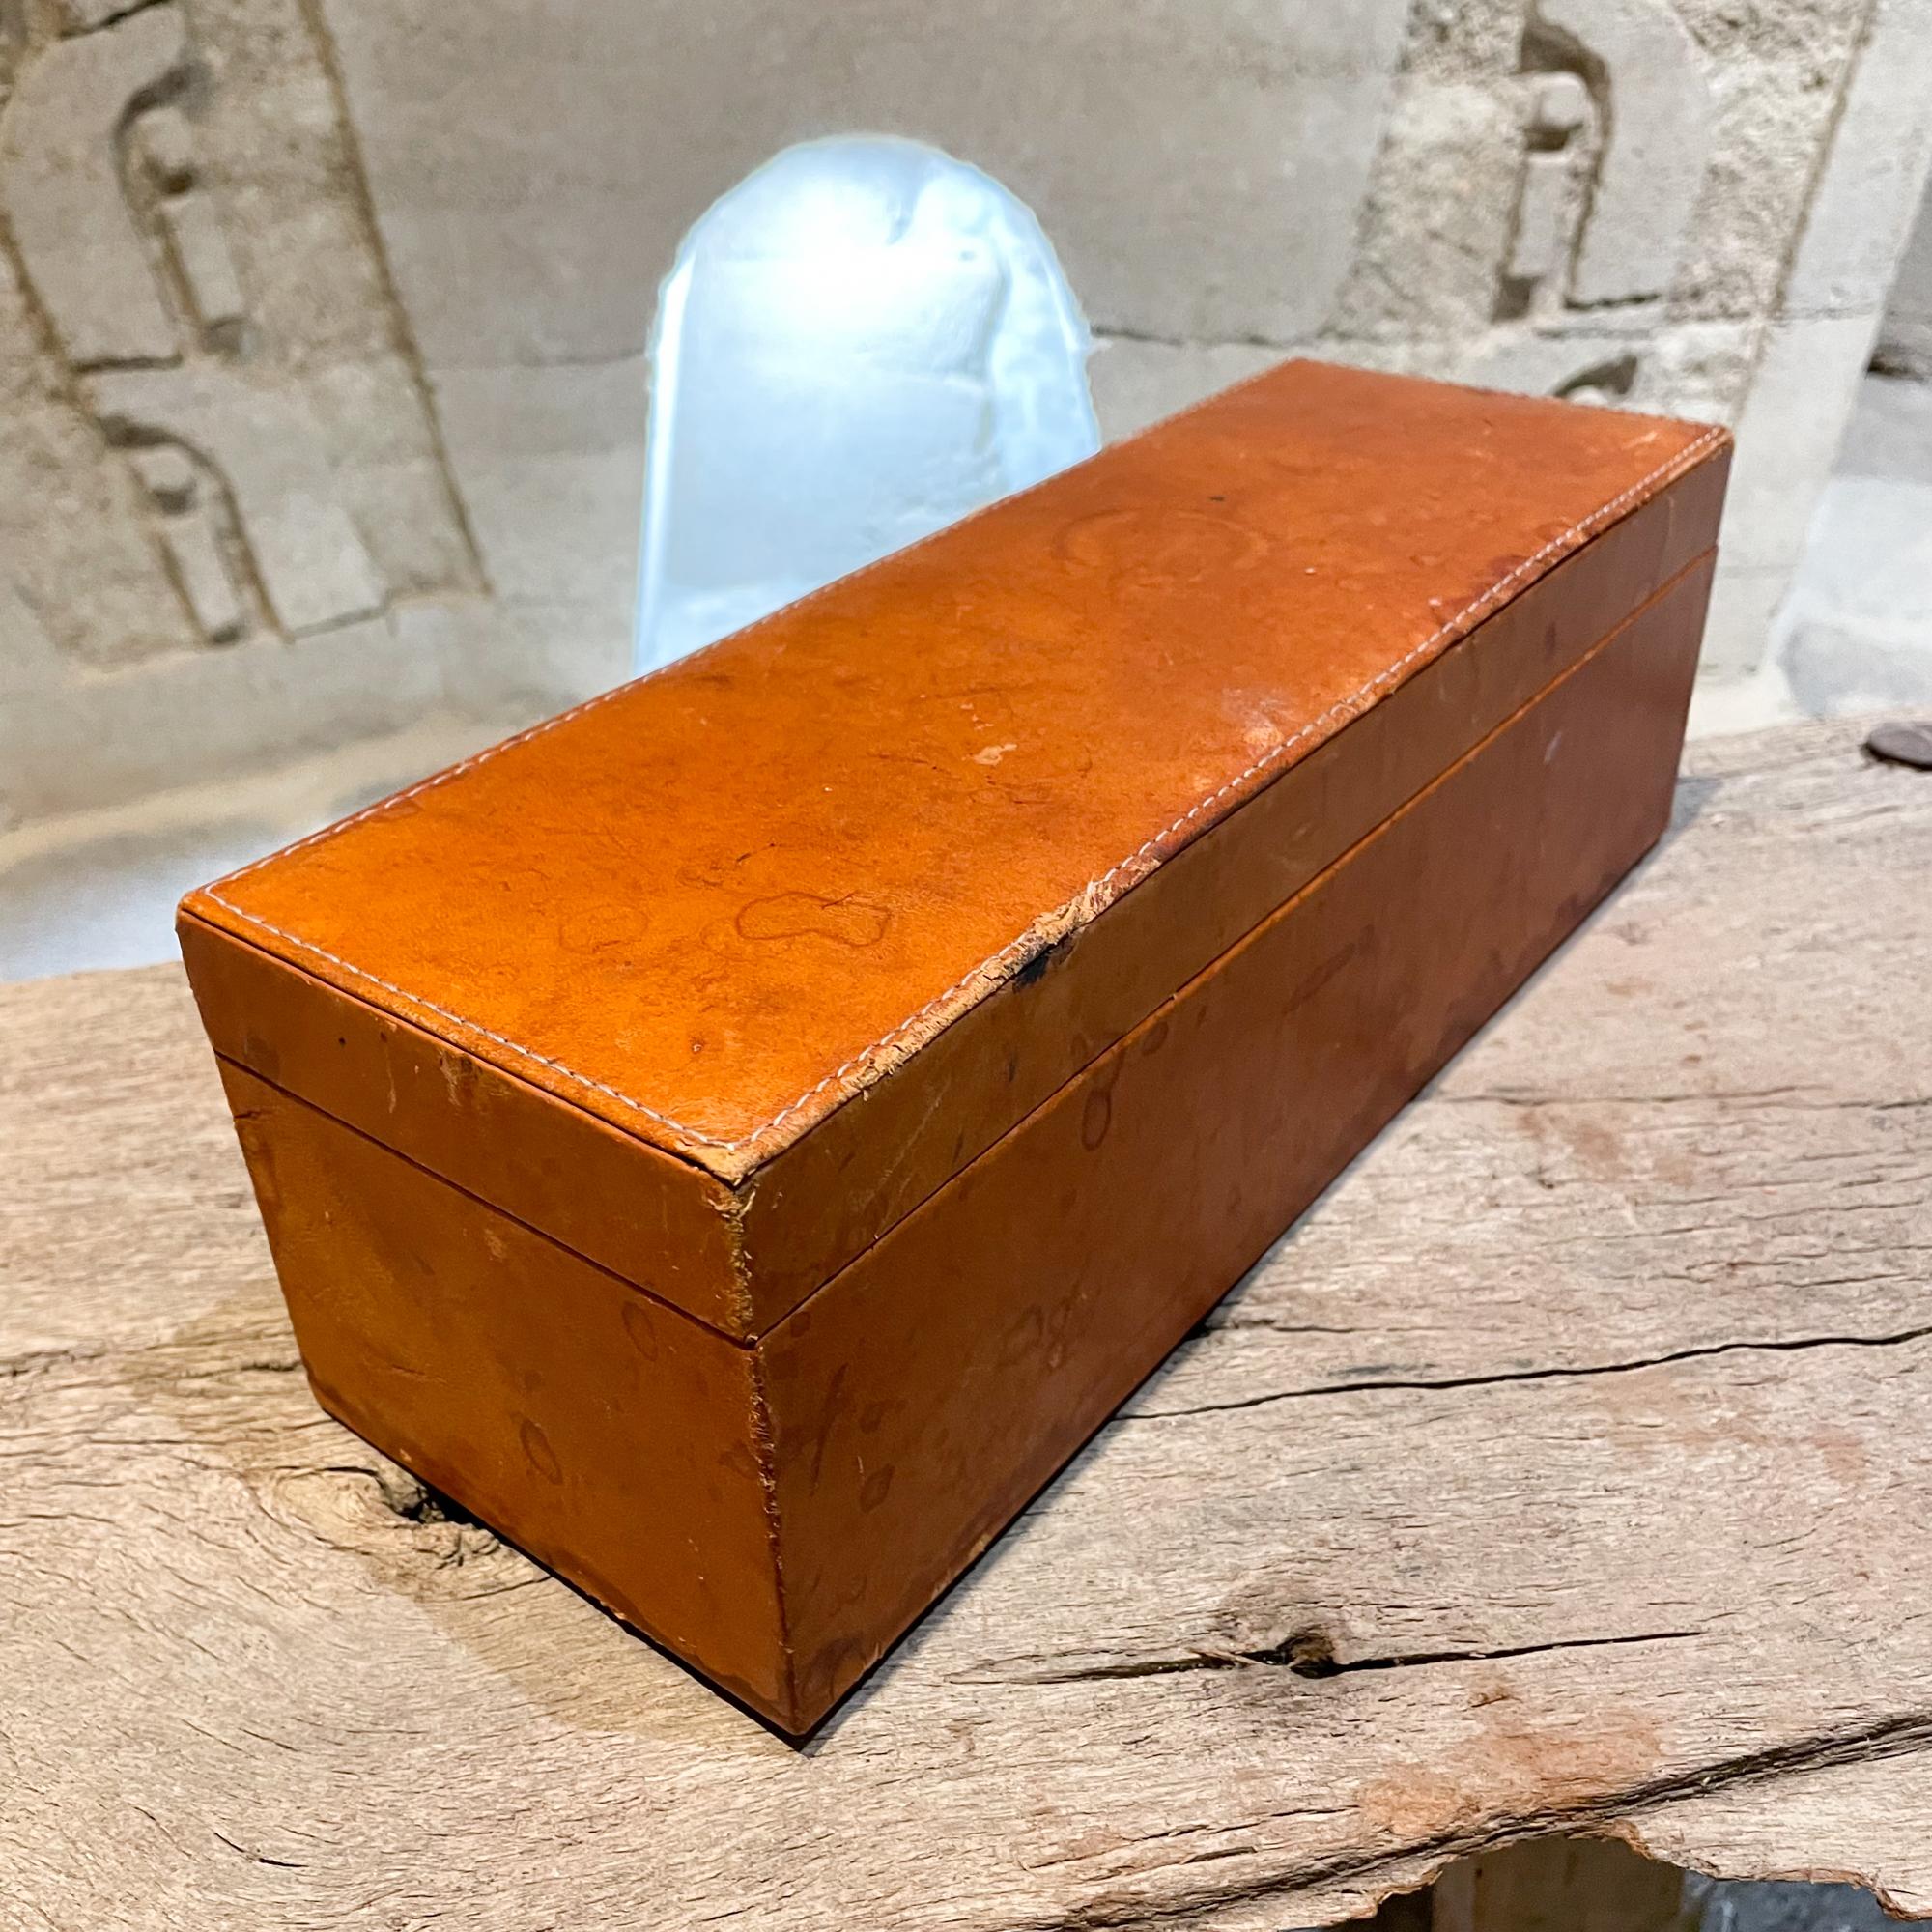 In the style of HERMES distressed leather wrapped box in Cognac Carmel color.
Handcrafted by Piel Canela. Label present. Juarez Mexico City.
Interior features sectioned compartments.
Contrast stitching.
Measures: 12.5 L x 4.75 W x 4 H